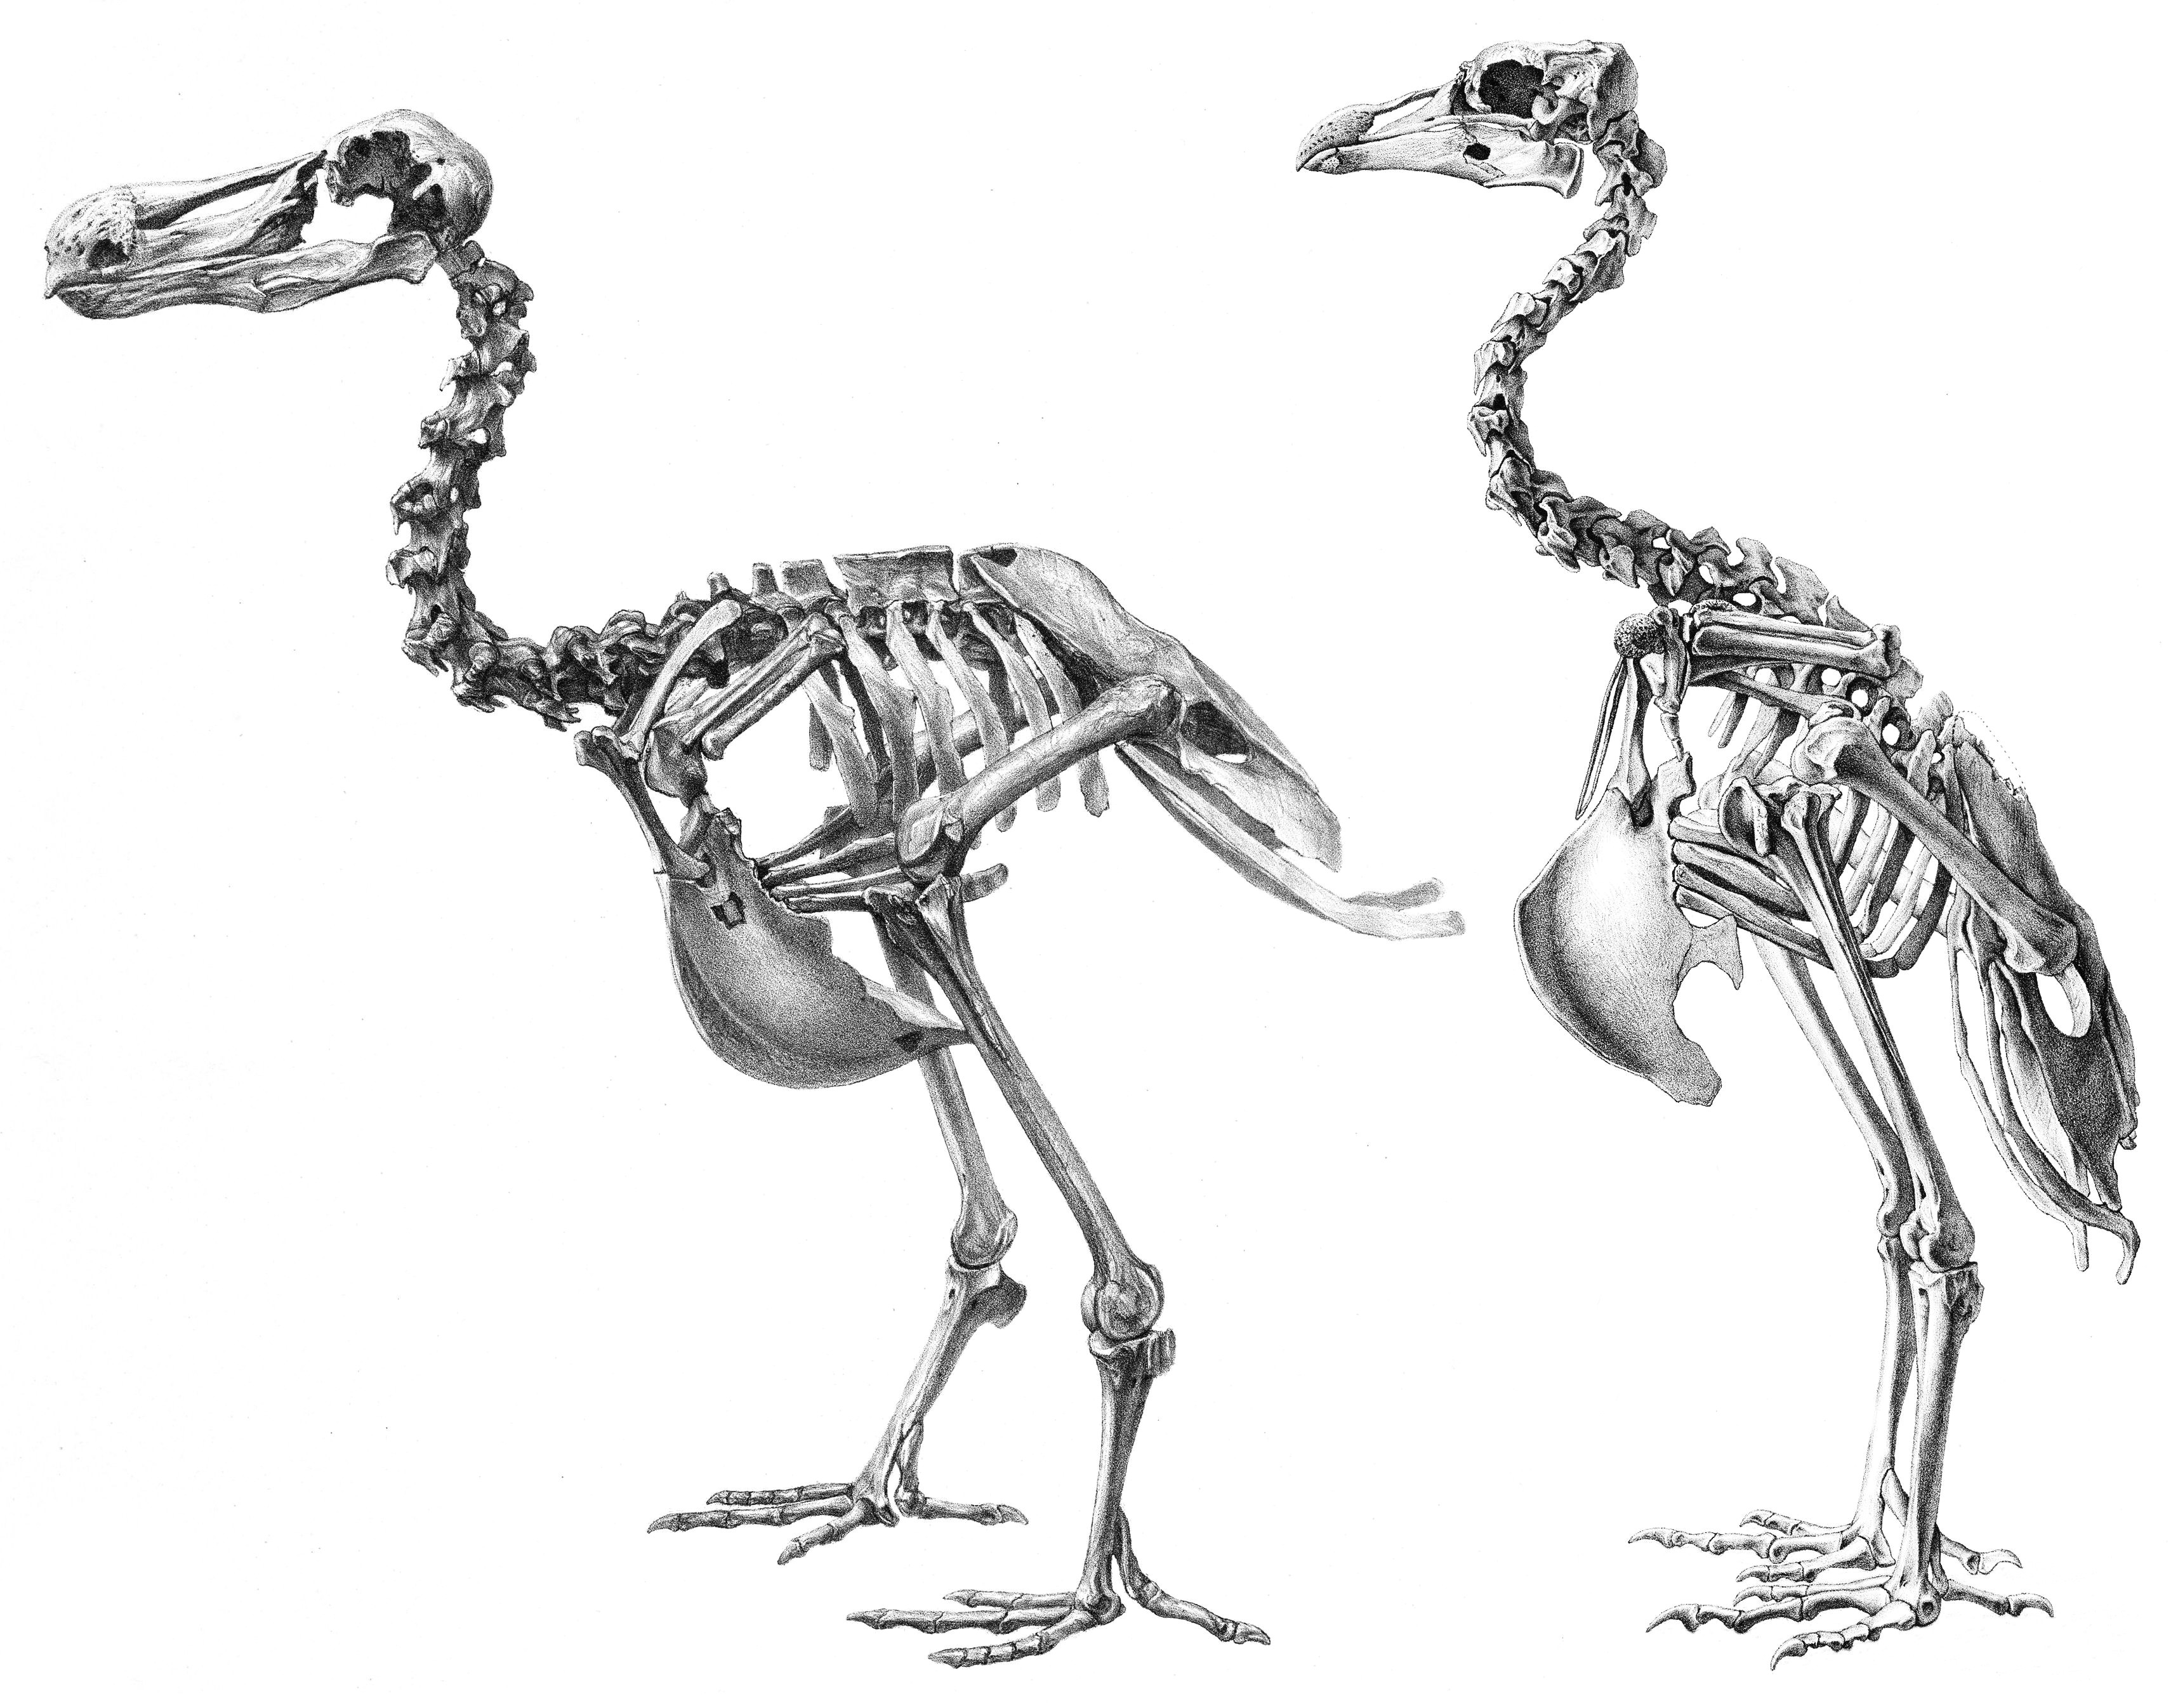 Drawing Not to Scale Dodo and Rodrigues solitaire Skeletons Compared Not to Scale Dodo